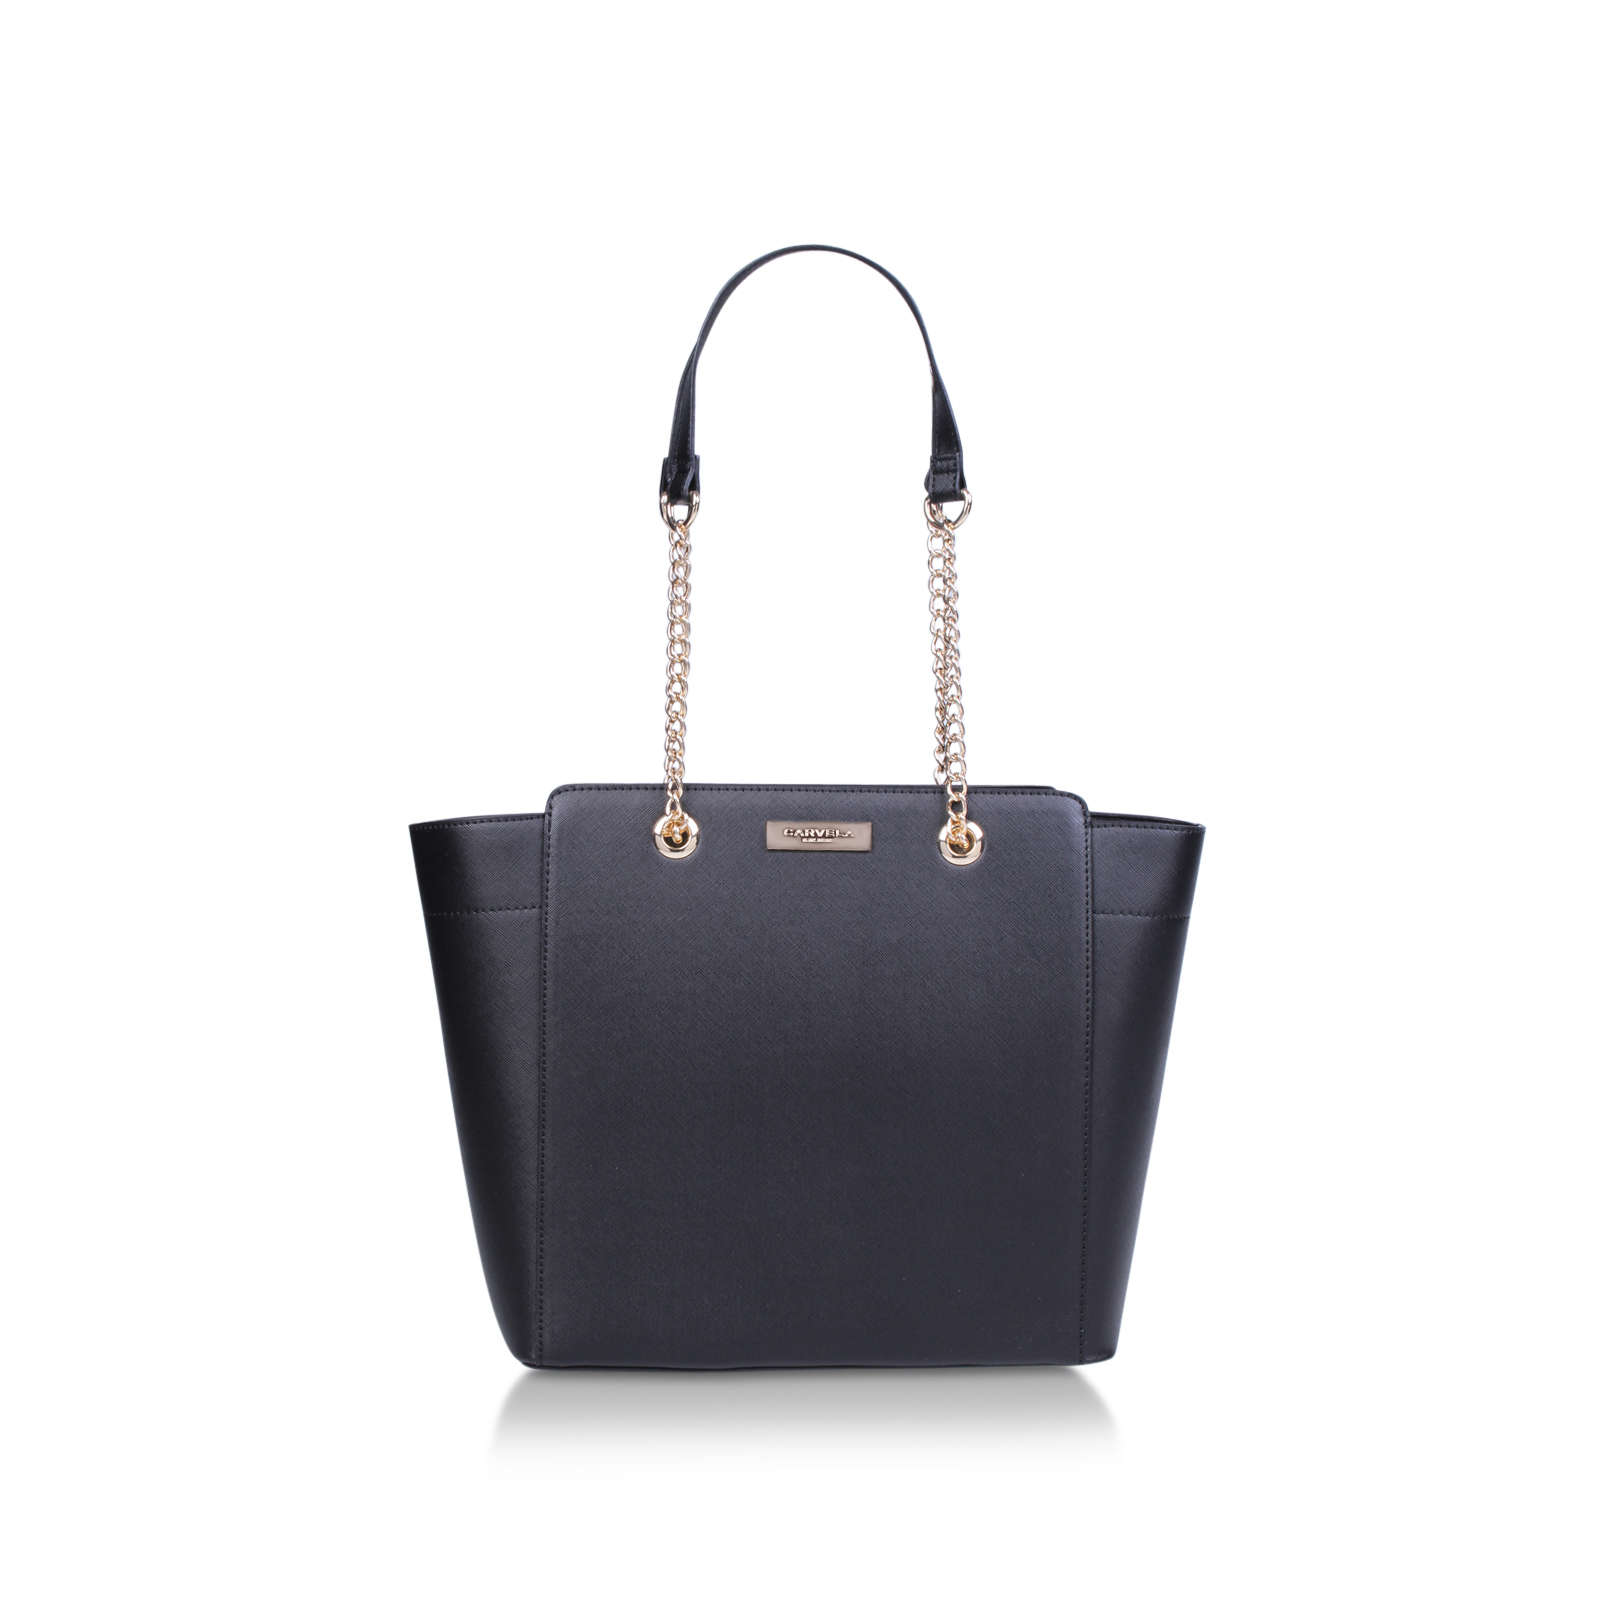 RATE TOTE WITH PART CHAIN - CARVELA HANDBAGS